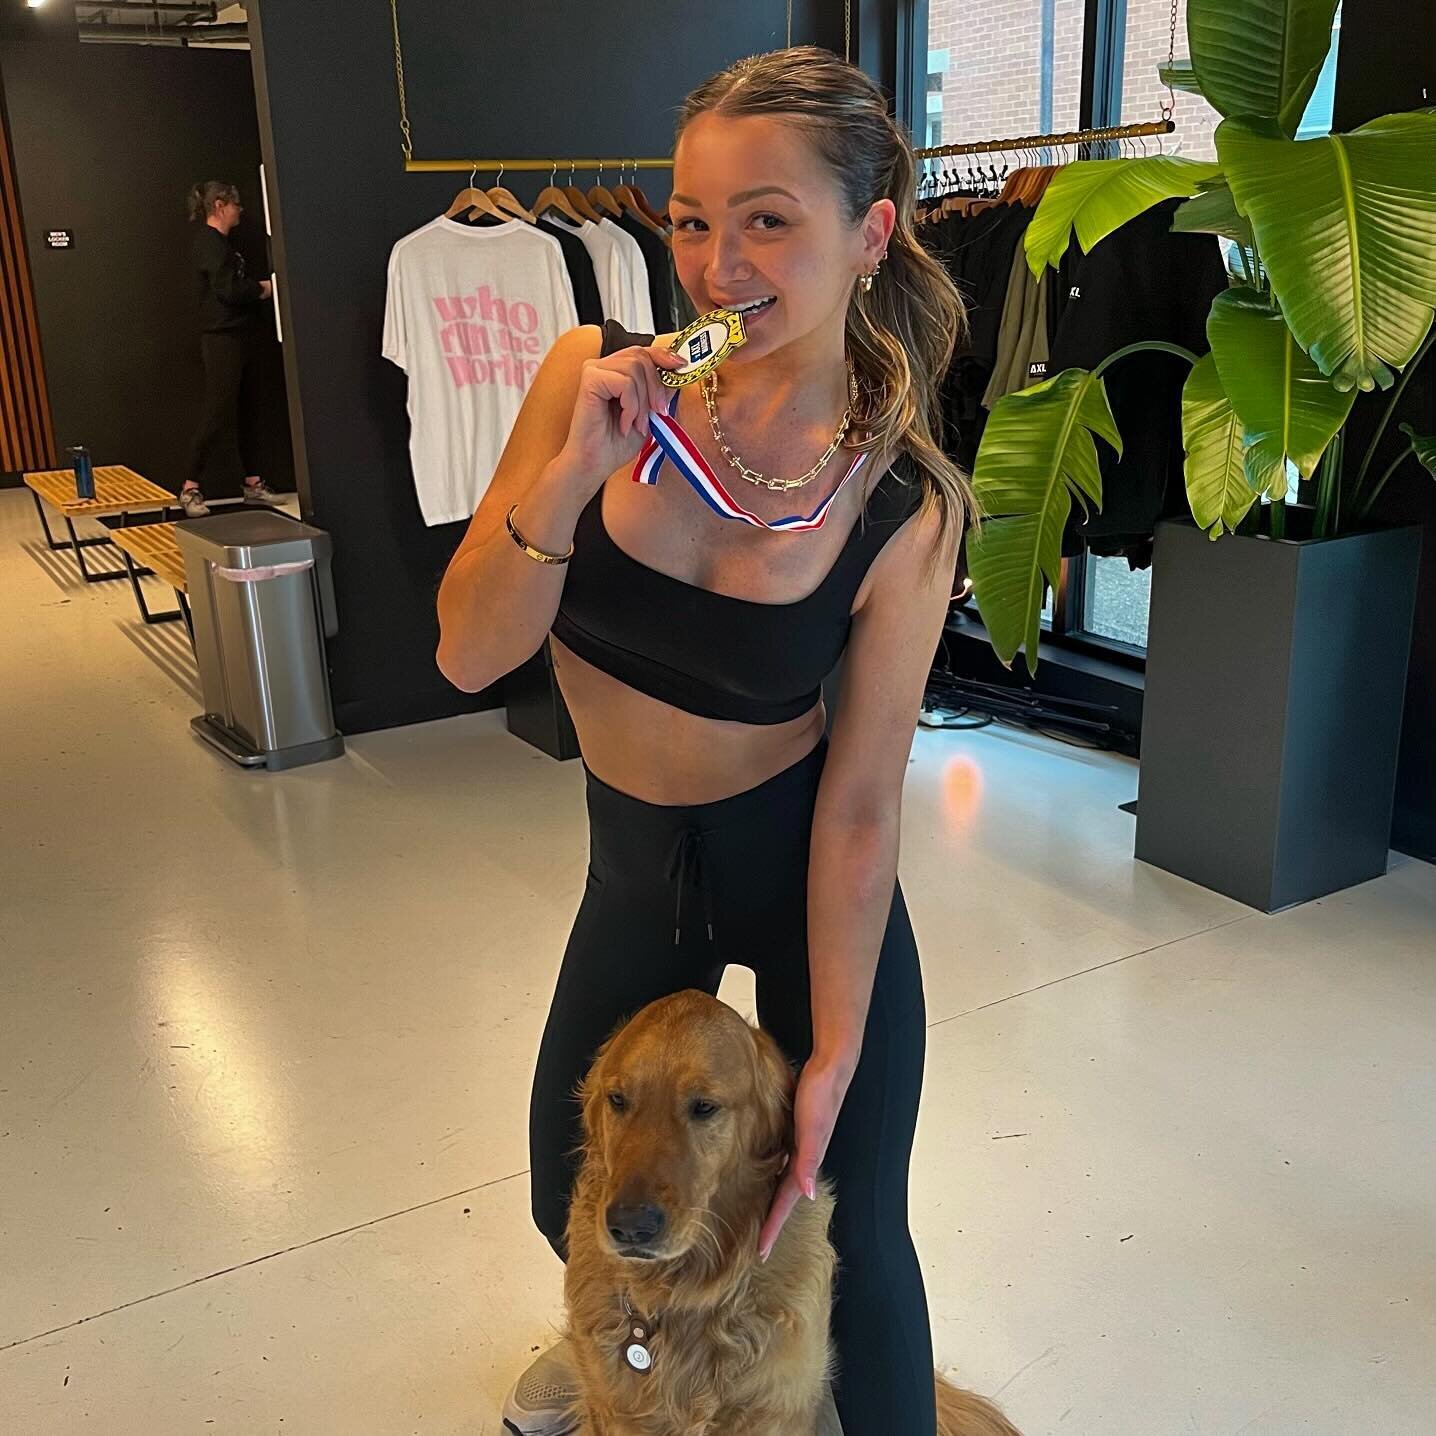 Congratulations to TEAM KRISTA for taking home 1st place in our March Madness challenge! We&rsquo;ll be in touch to plan your AXL hang and ✨medal ceremony✨

THE RANKINGS
1️⃣ TEAM KRISTA 356
2️⃣ TEAM DELANEY 348
3️⃣ TEAM ASHLEY &amp; MORGAN 278
4️⃣ TE